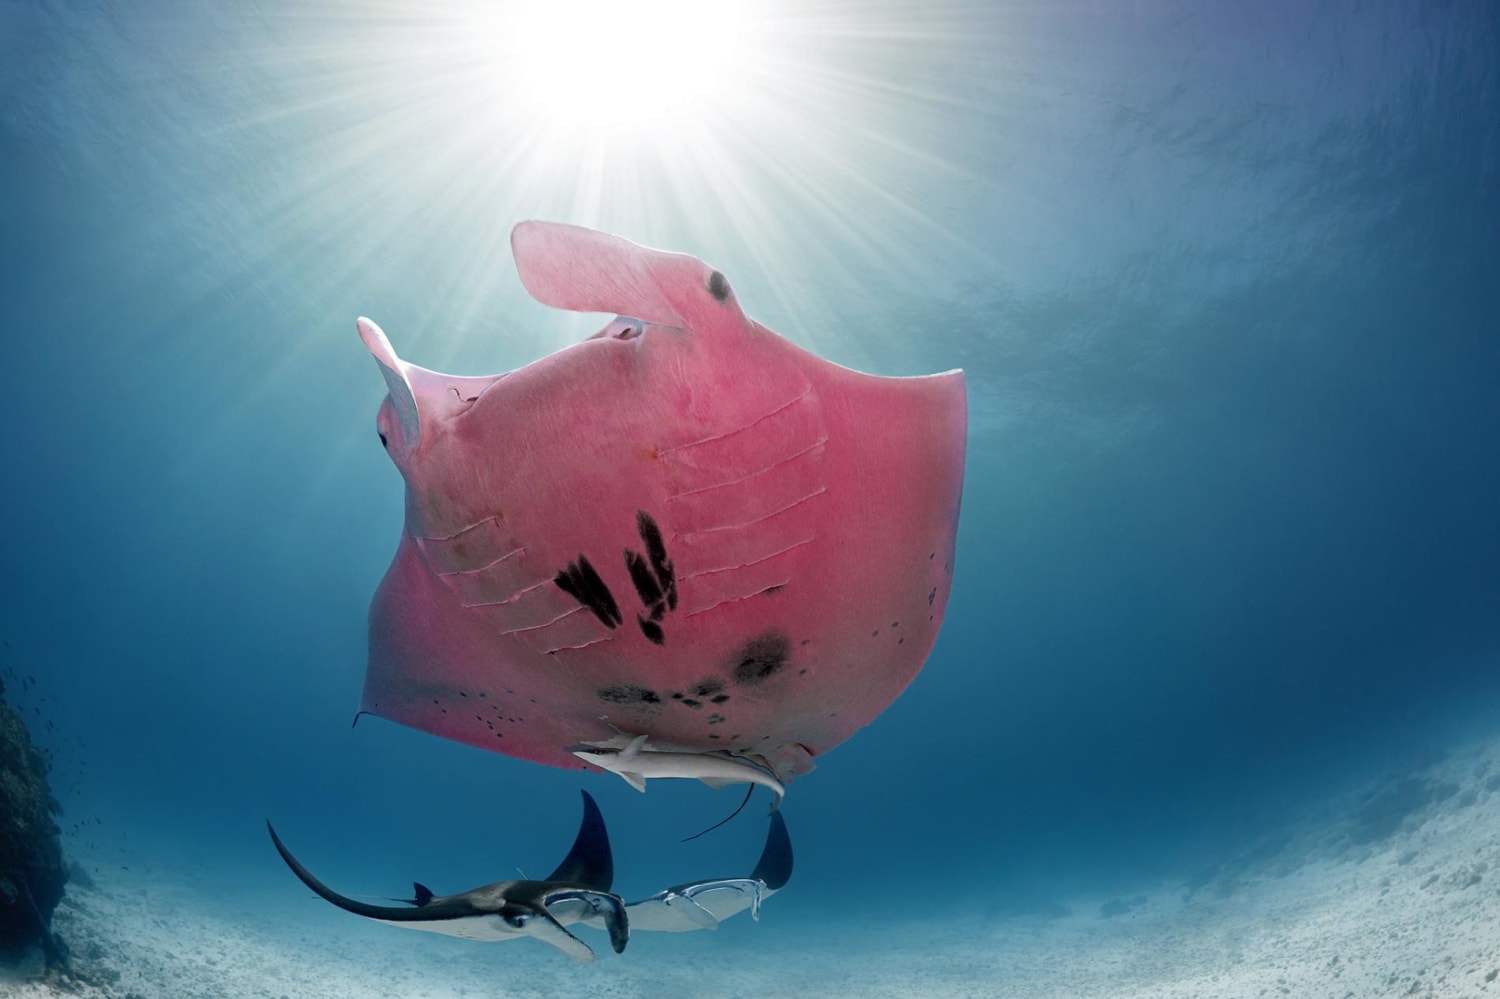 How did this rare pink manta get its color?